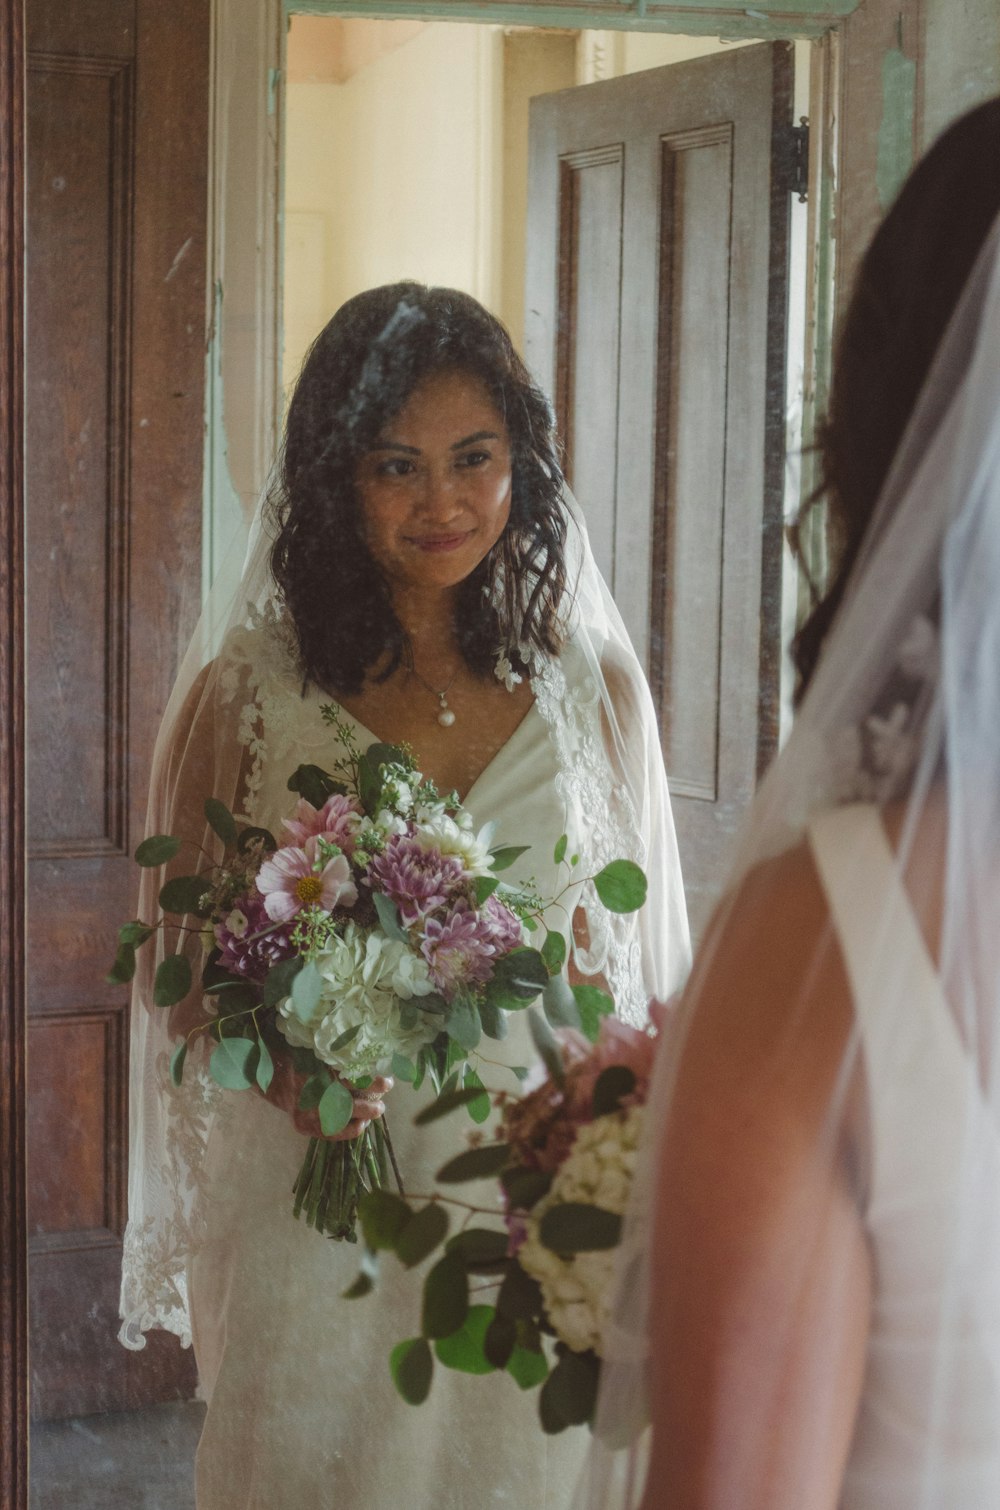 smiling woman in front of mirror wearing white wedding gown and holding flowers